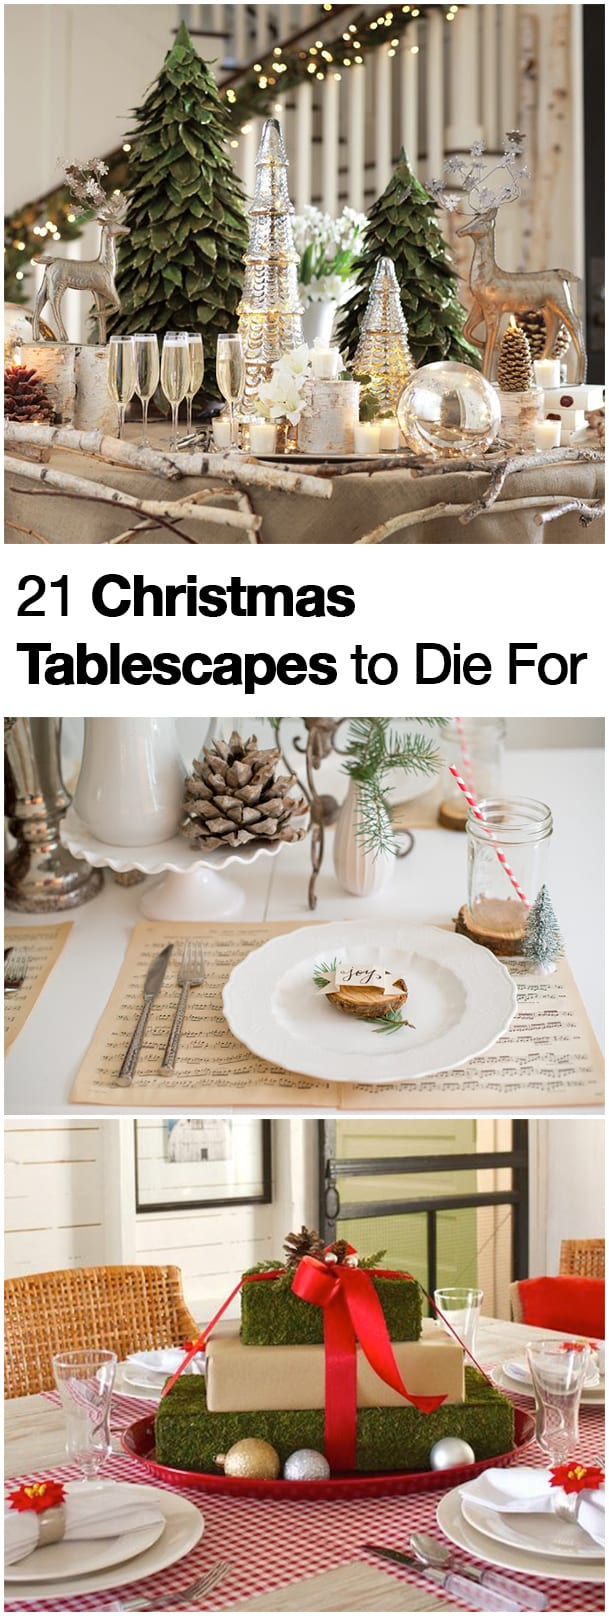 21 Christmas Tablescapes to Die For